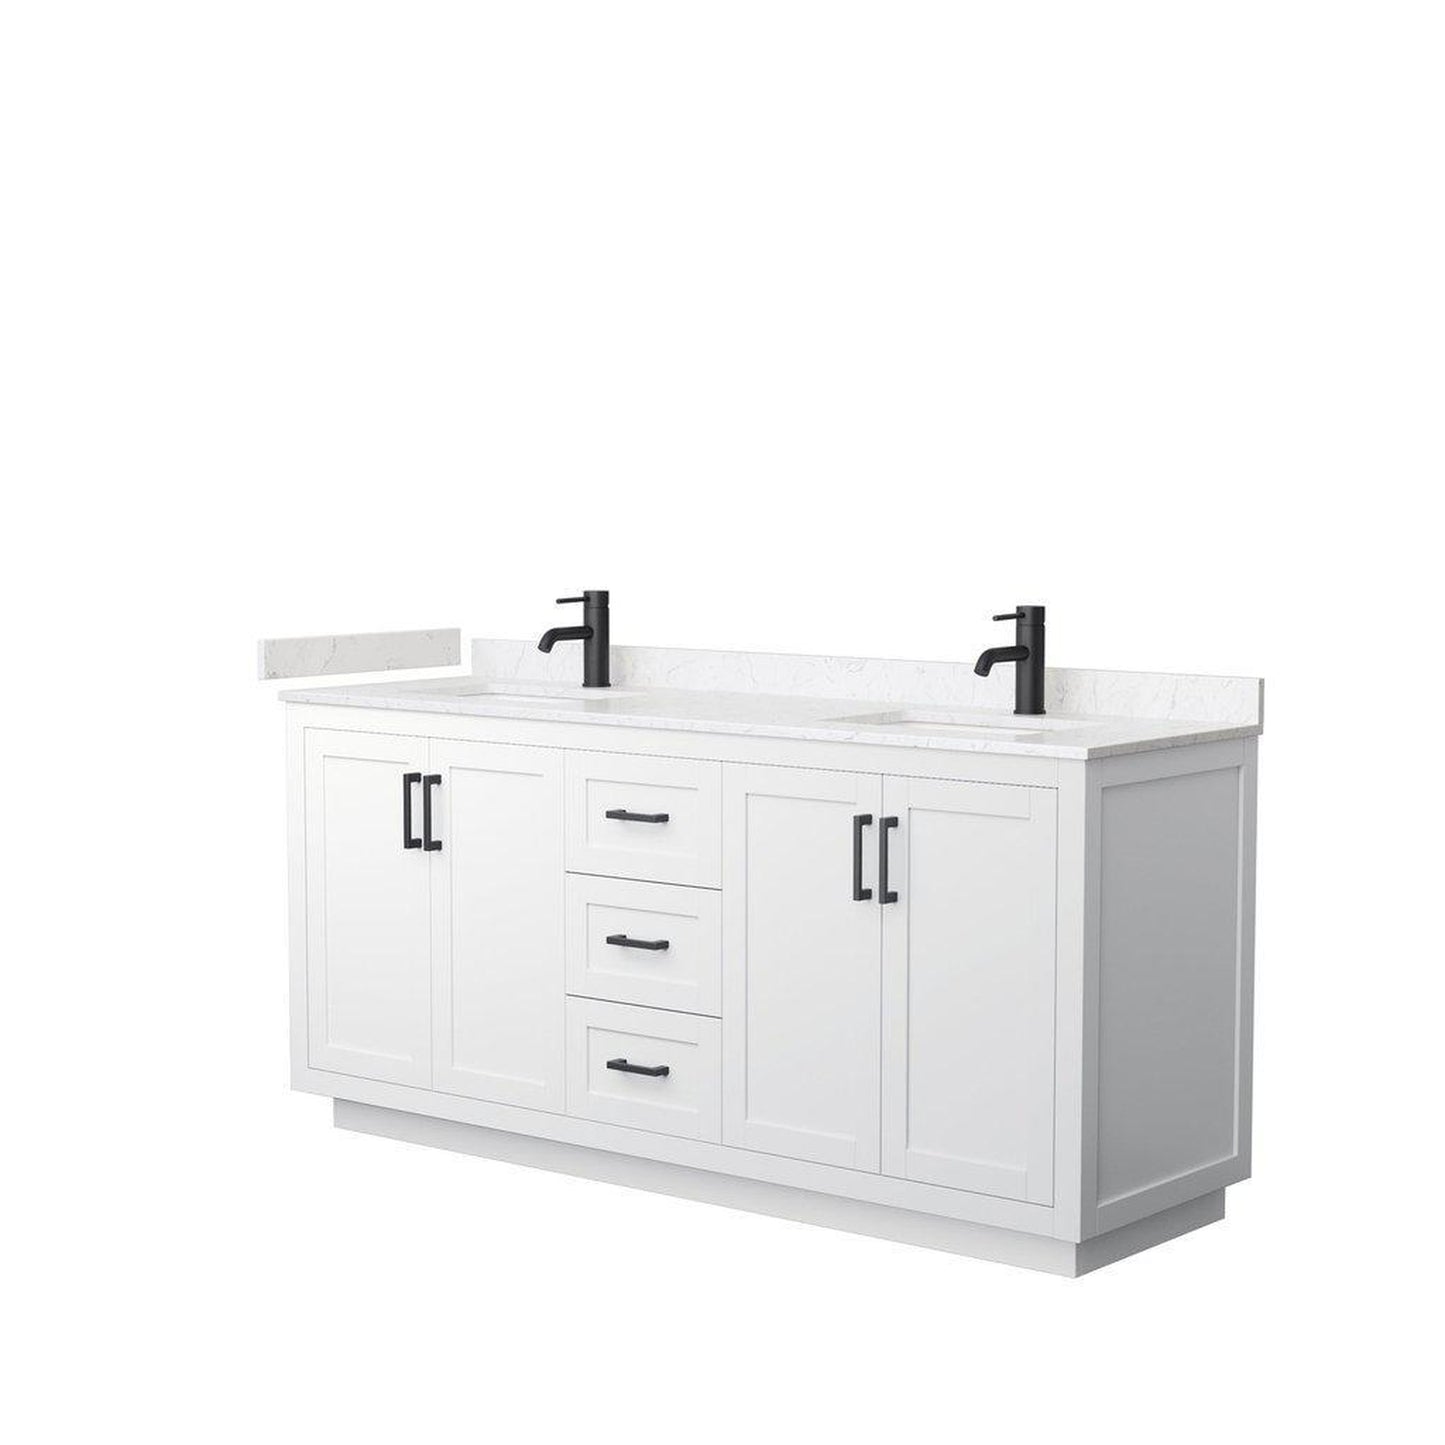 Wyndham Collection Miranda 72" Double Bathroom White Vanity Set With Light-Vein Carrara Cultured Marble Countertop, Undermount Square Sink, And Matte Black Trim